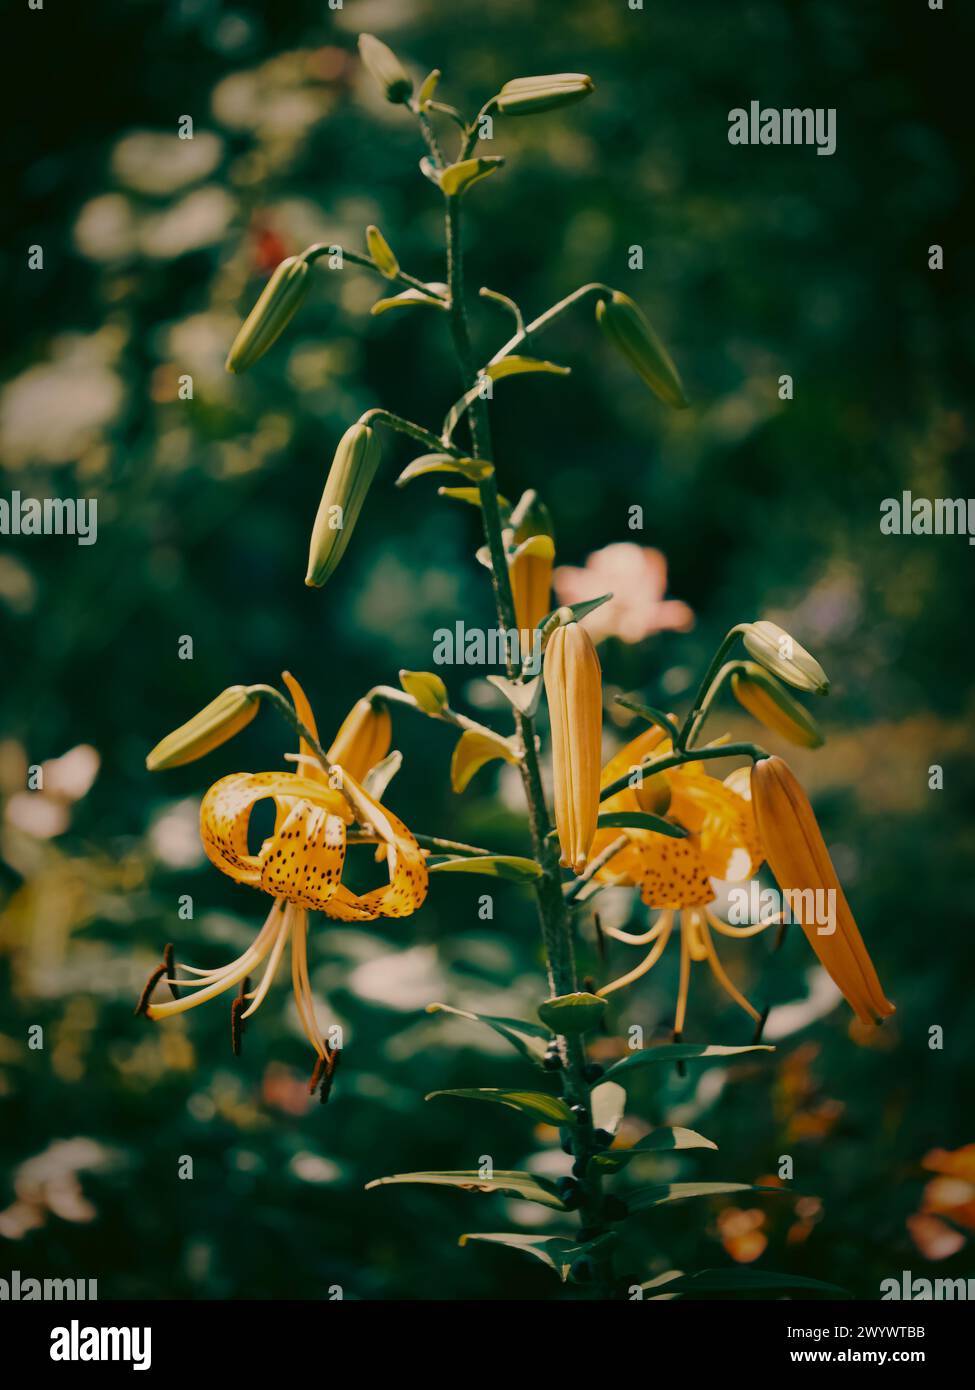 Vibrant yellow lilies with speckled petals bloom among unopened buds; their elegance contrasts the soft-focus greenery in the backdrop. Stock Photo